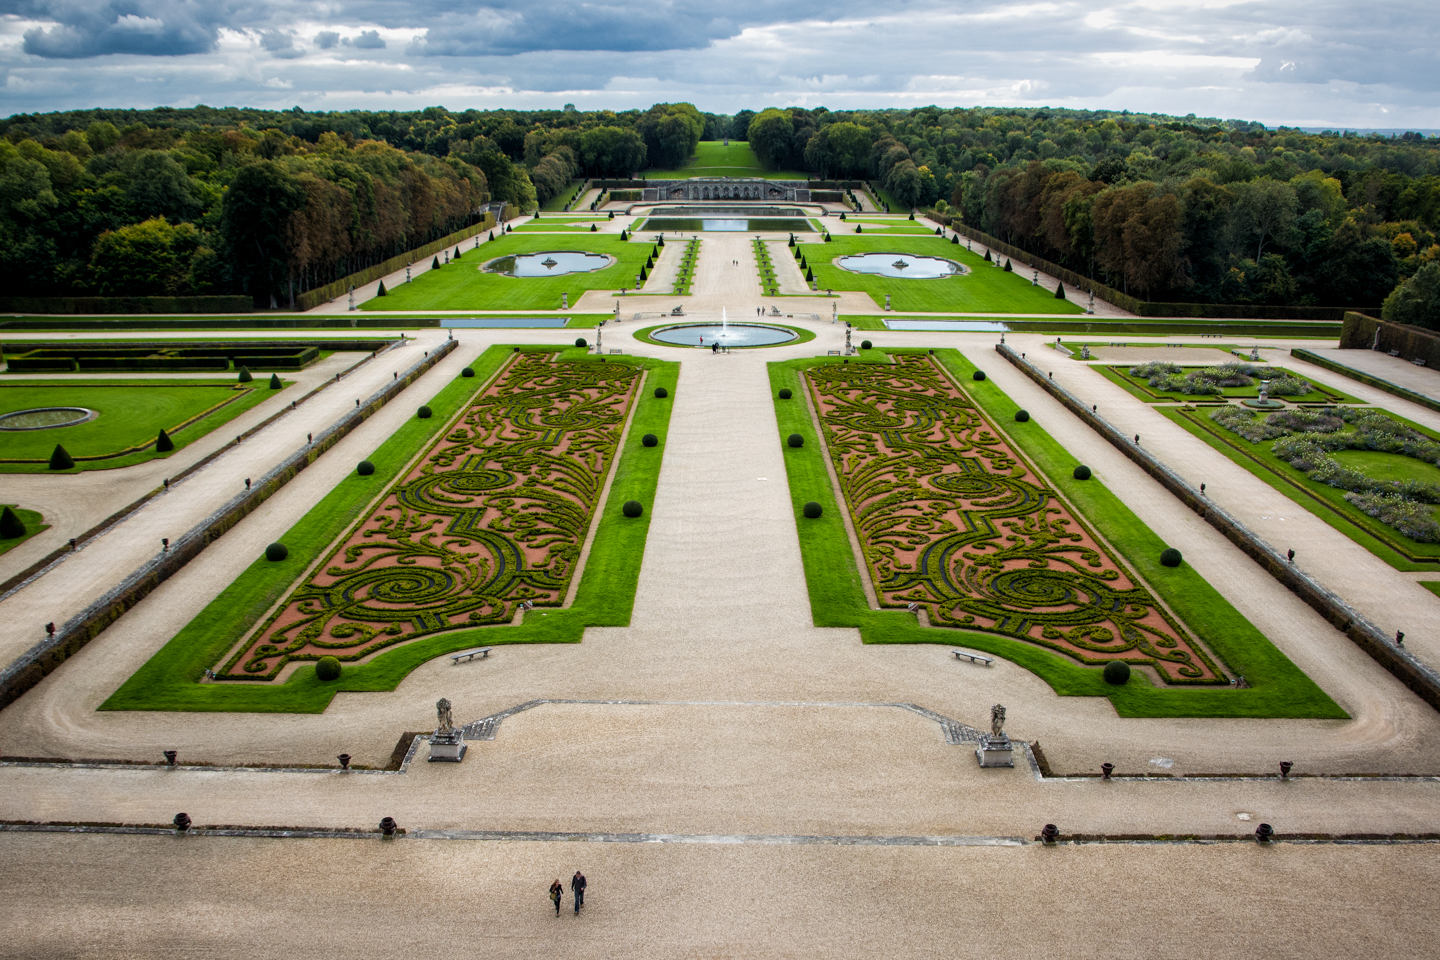 The gardens at Vaux-de-Vicomte are large and impressive.